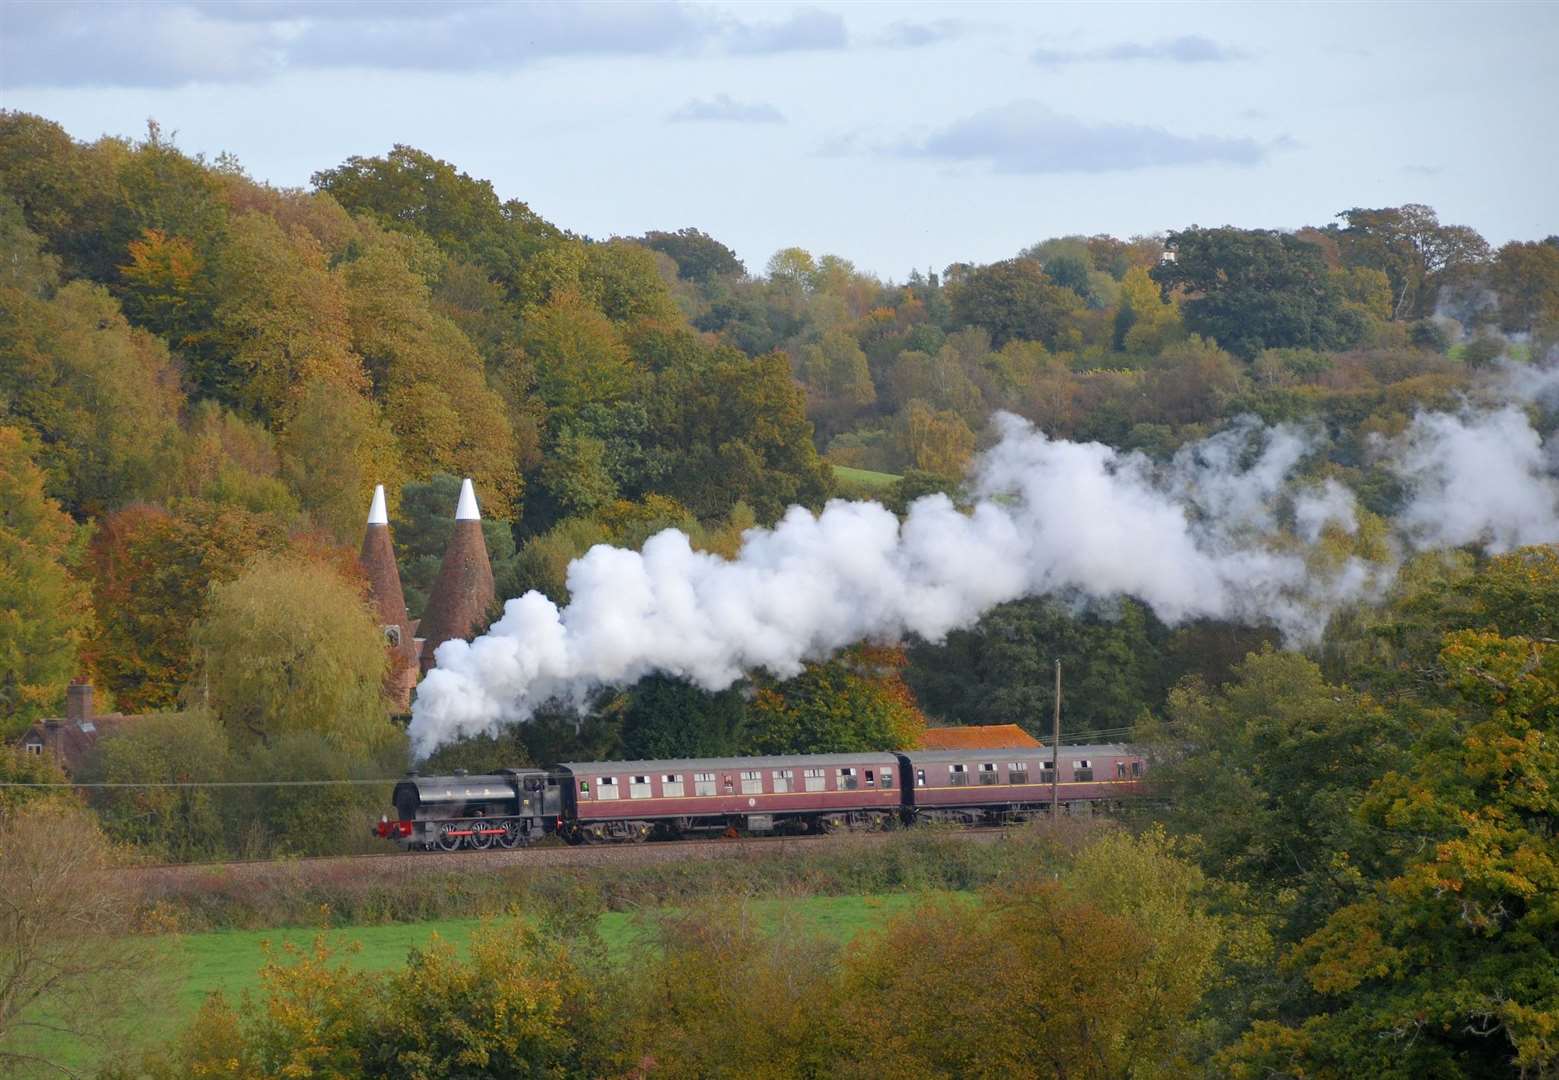 The Spa Valley Railway takes families on a picturesque journey through West Kent's countryside